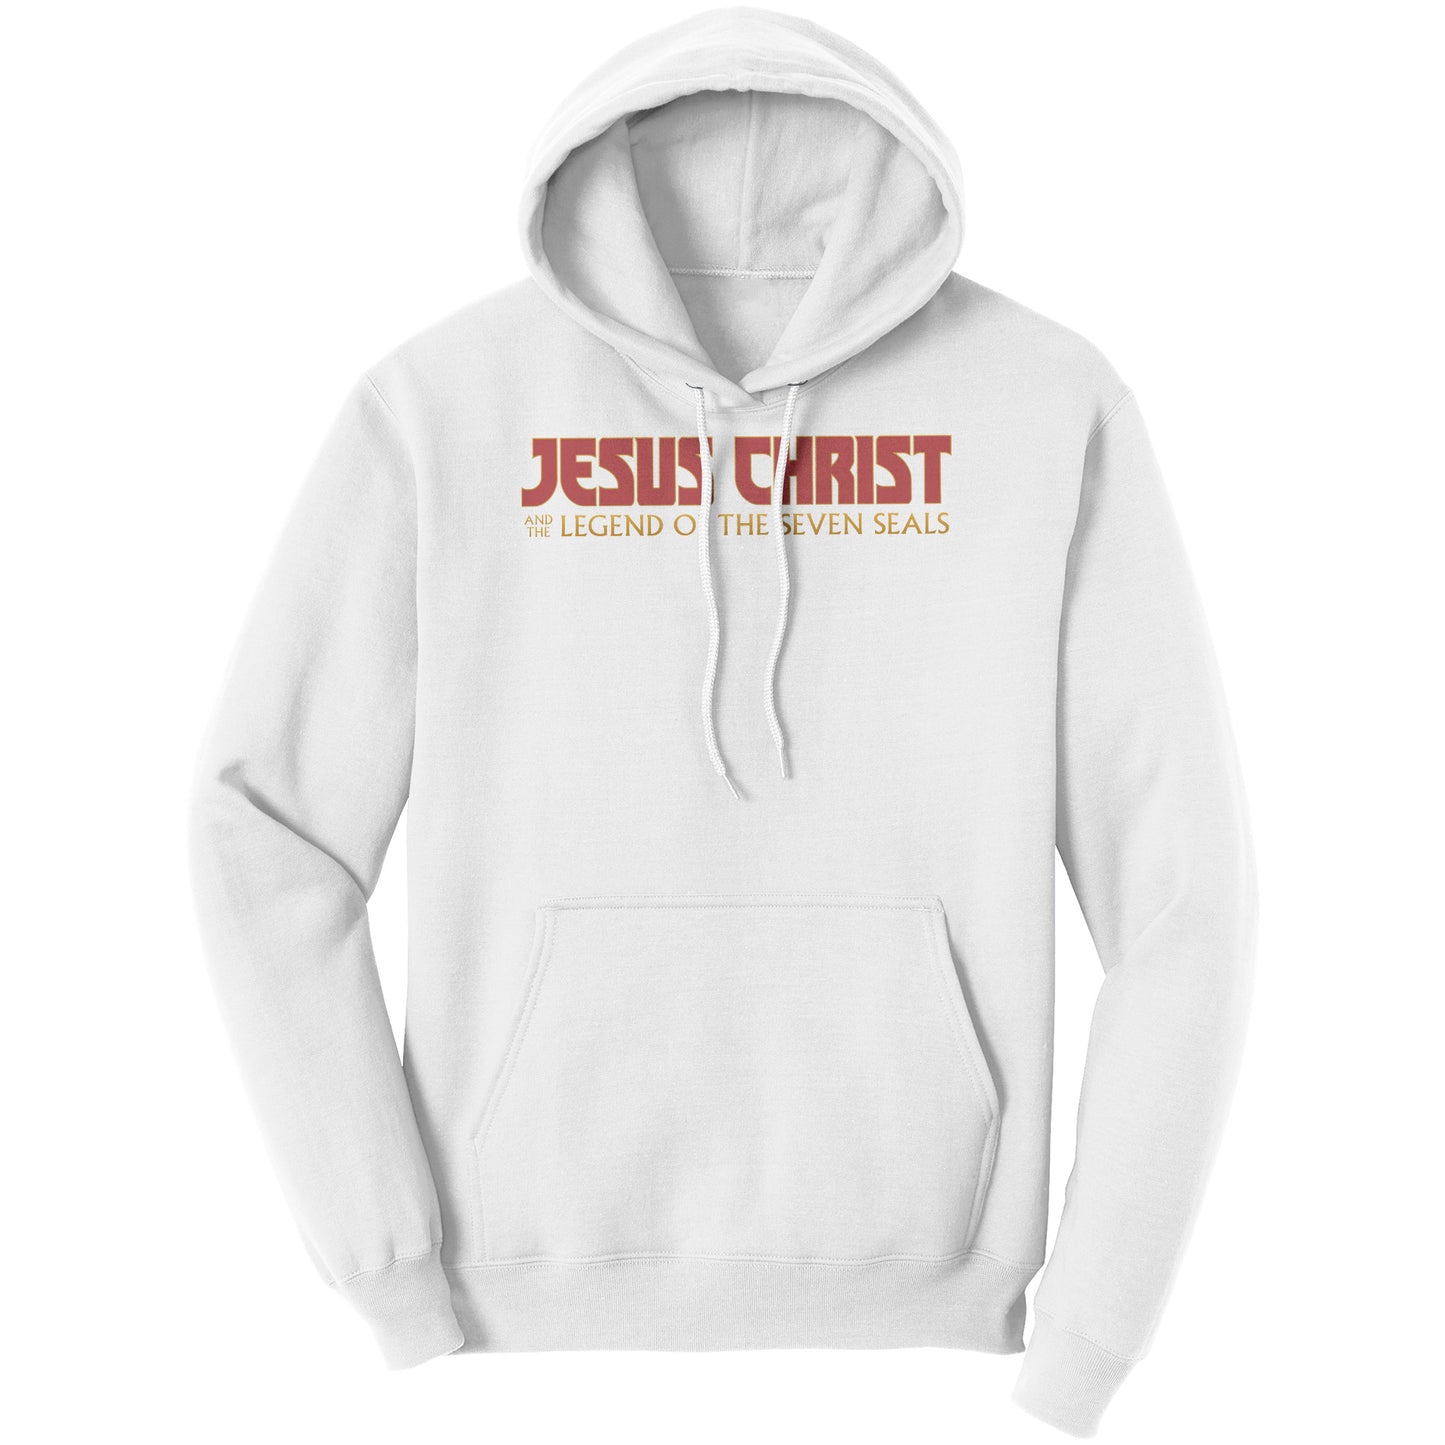 Jesus Christ and the Legend of the Seven Seals Hoodie